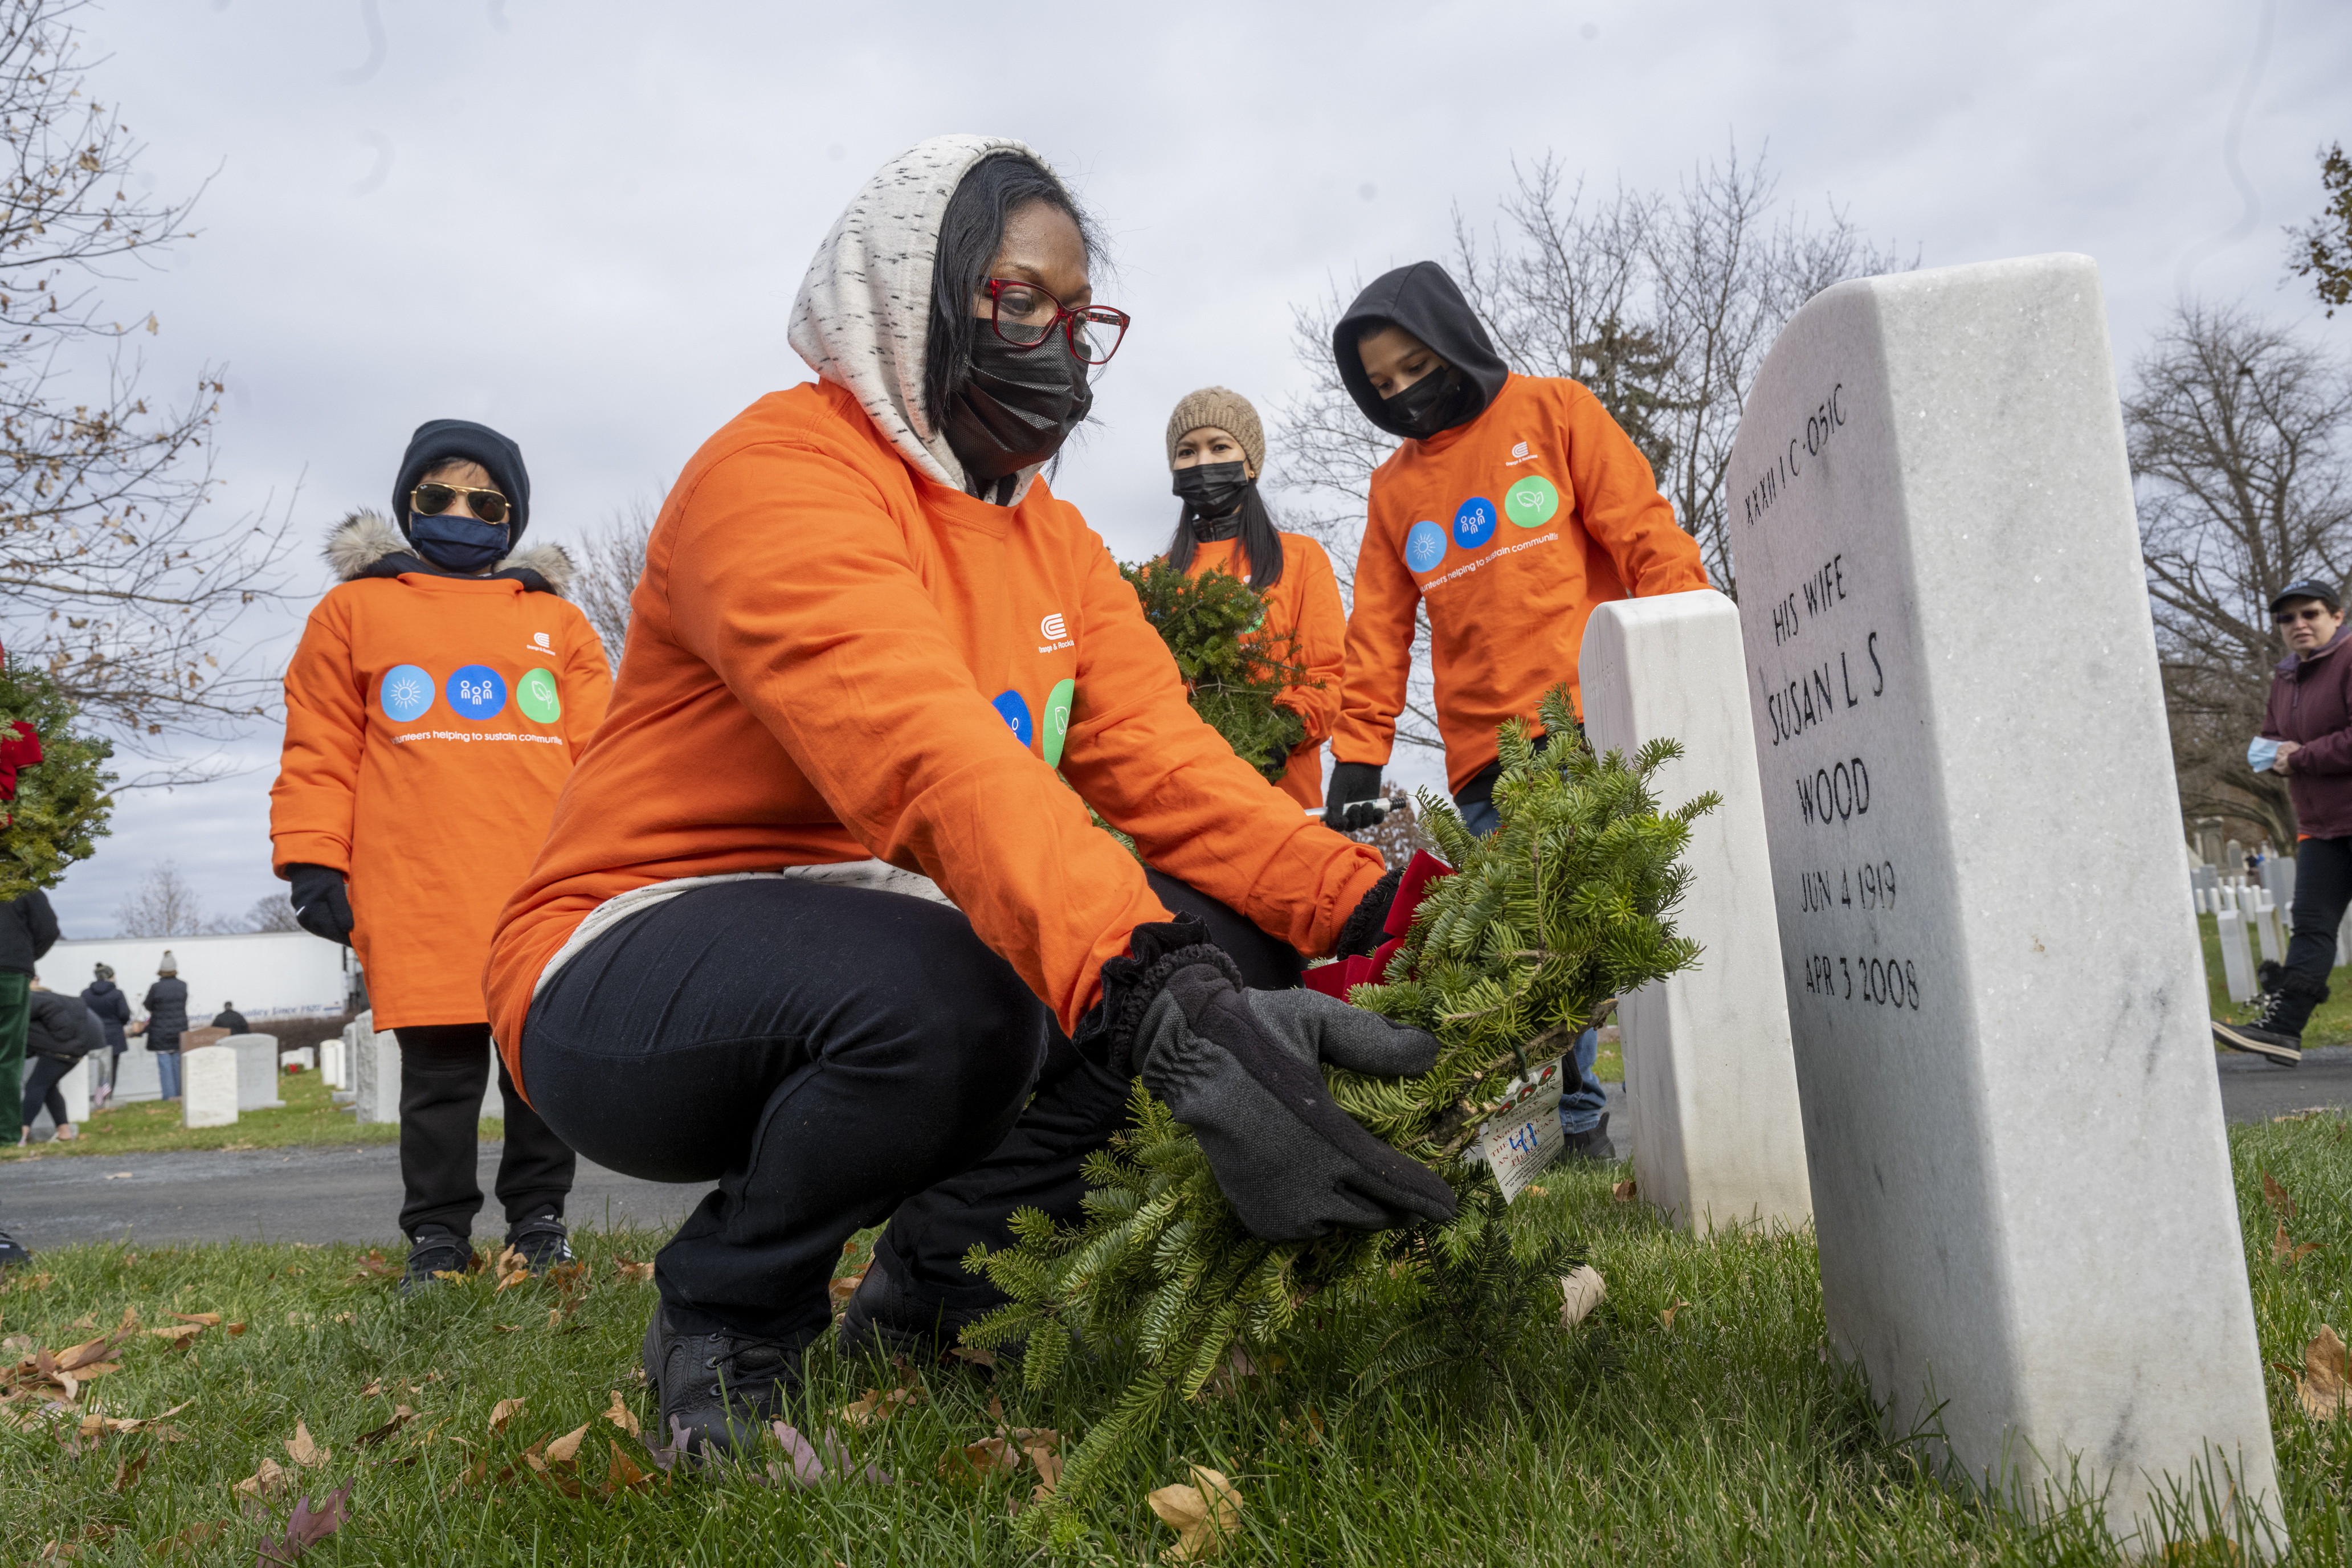 O&R employees placing wreaths for veterans